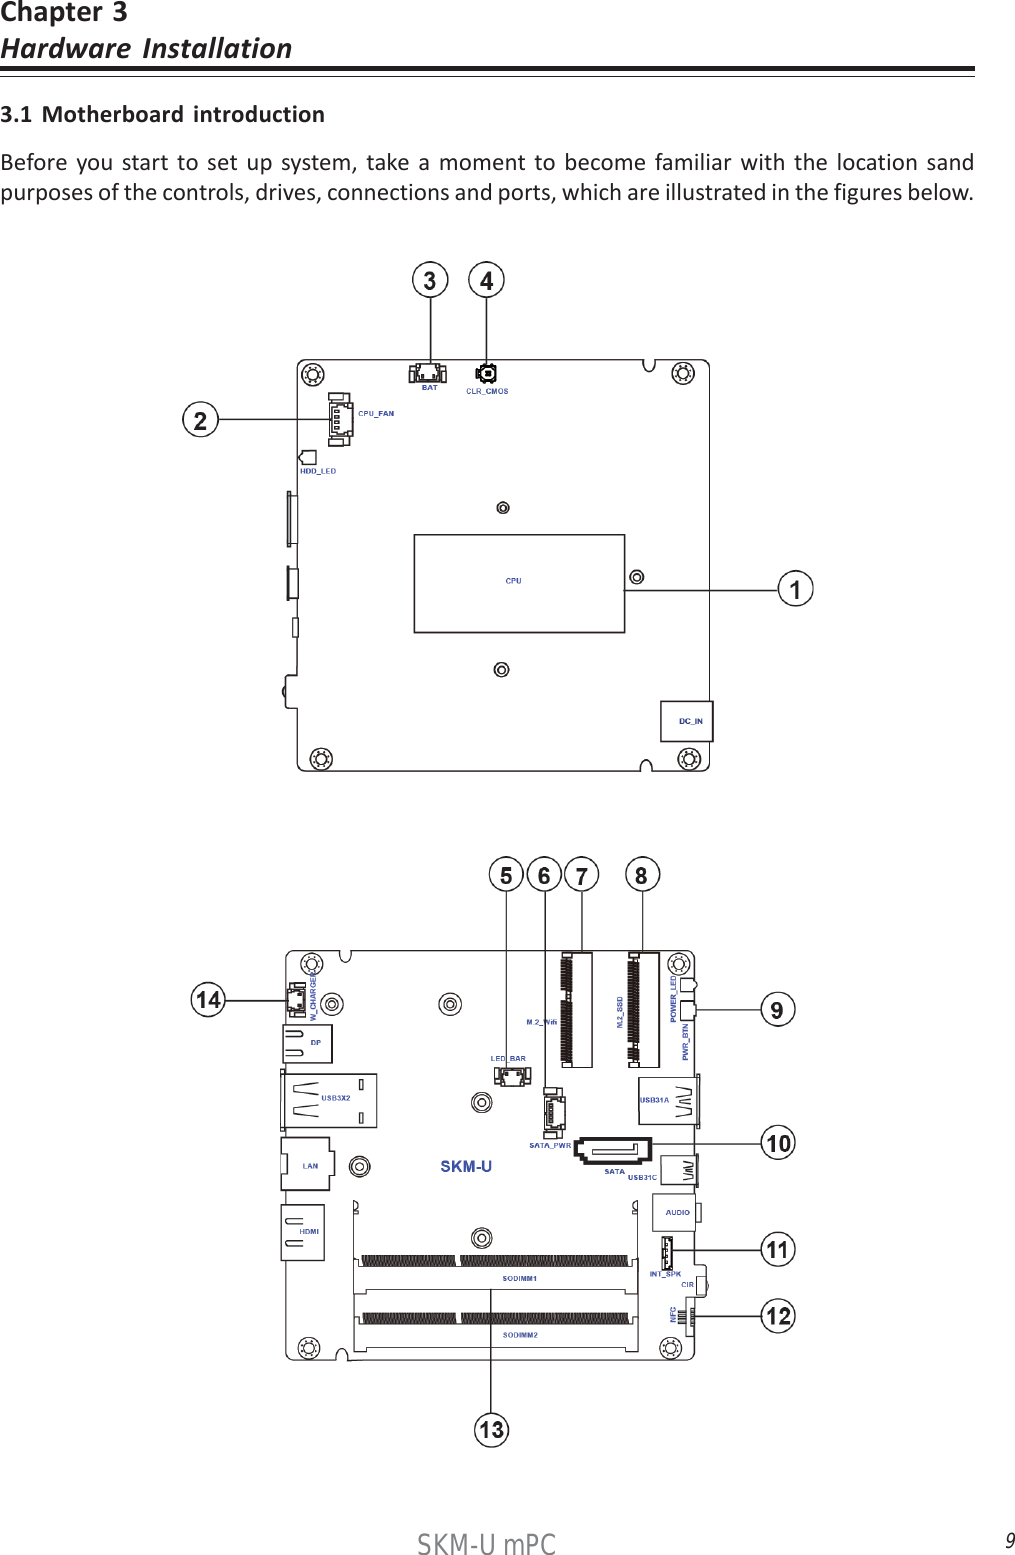 9SKM-U mPCChapter 3Hardware Installation3.1 Motherboard introductionBefore you start to set up system, take a moment to become familiar with the location sandpurposes of the controls, drives, connections and ports, which are illustrated in the figures below.